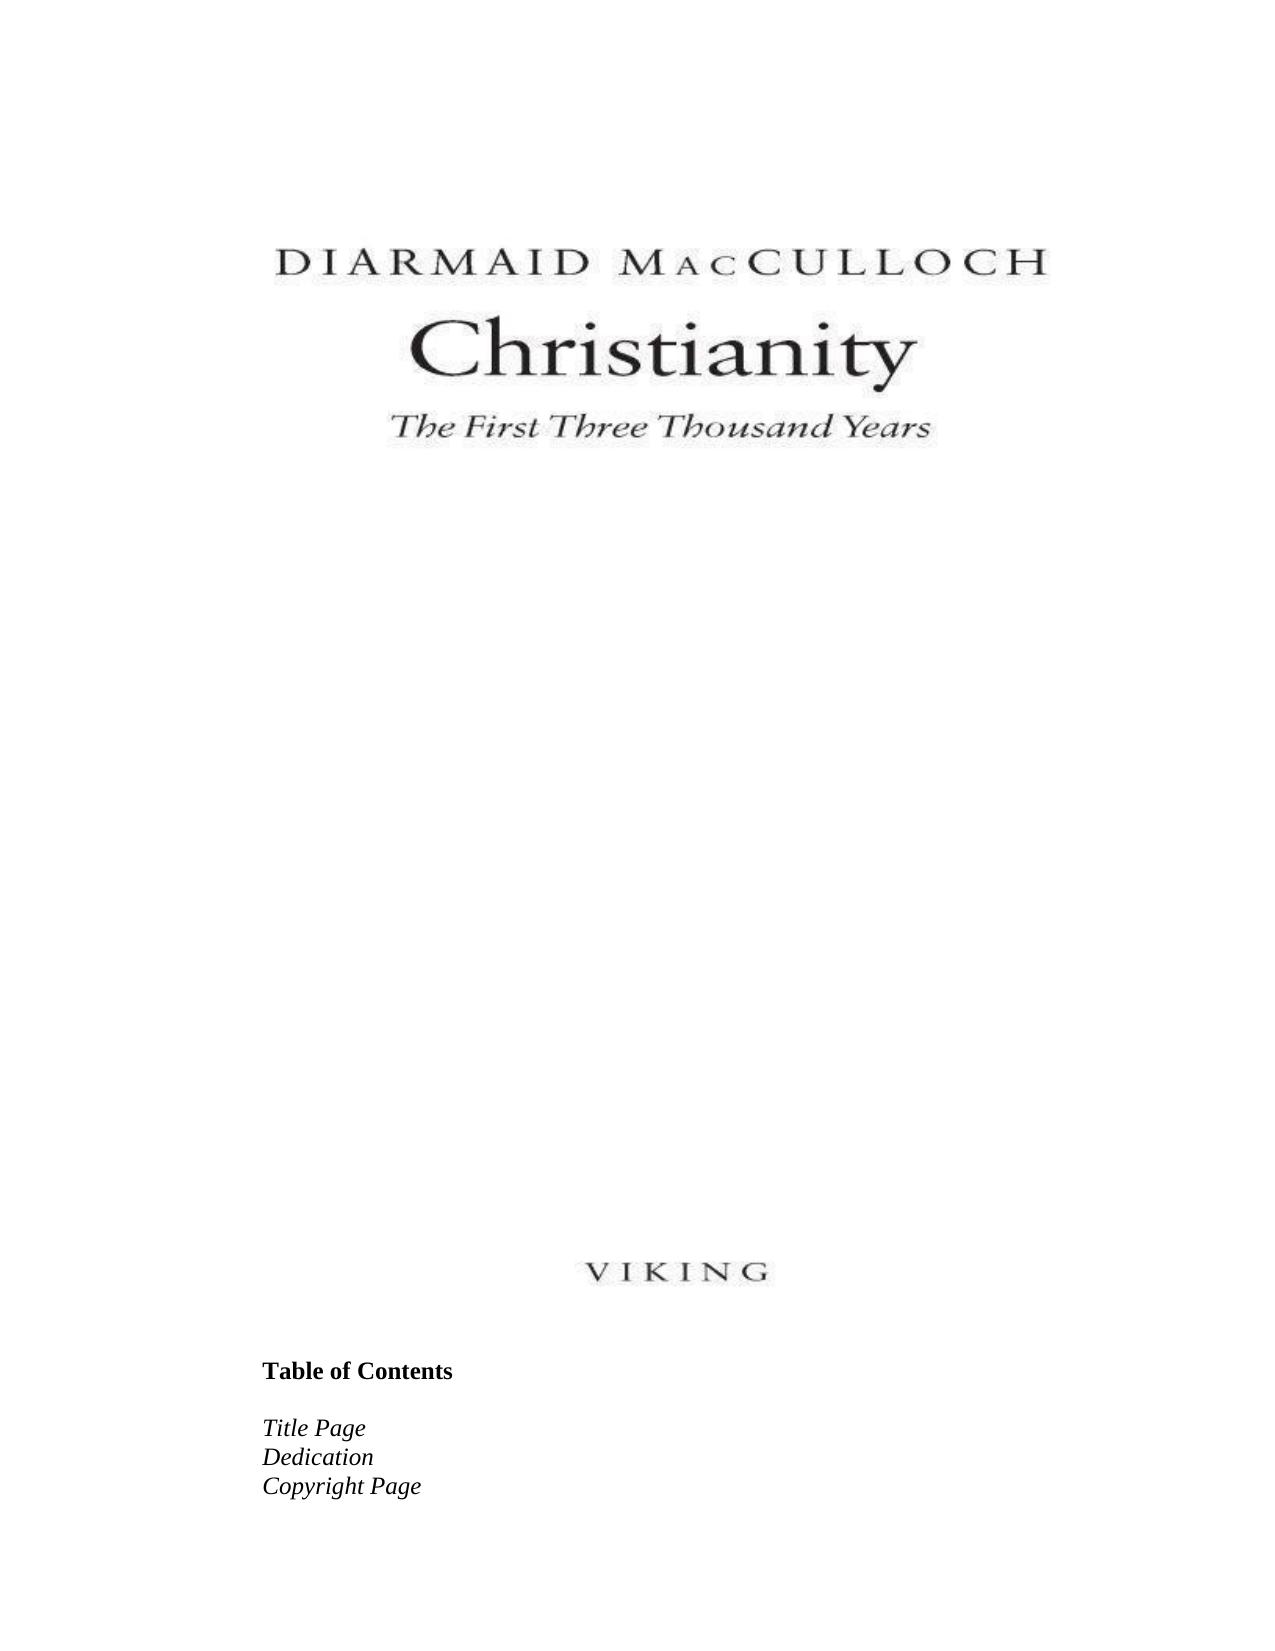 Christianity: The First Three Thousand Years by Diarmaid MacCulloch